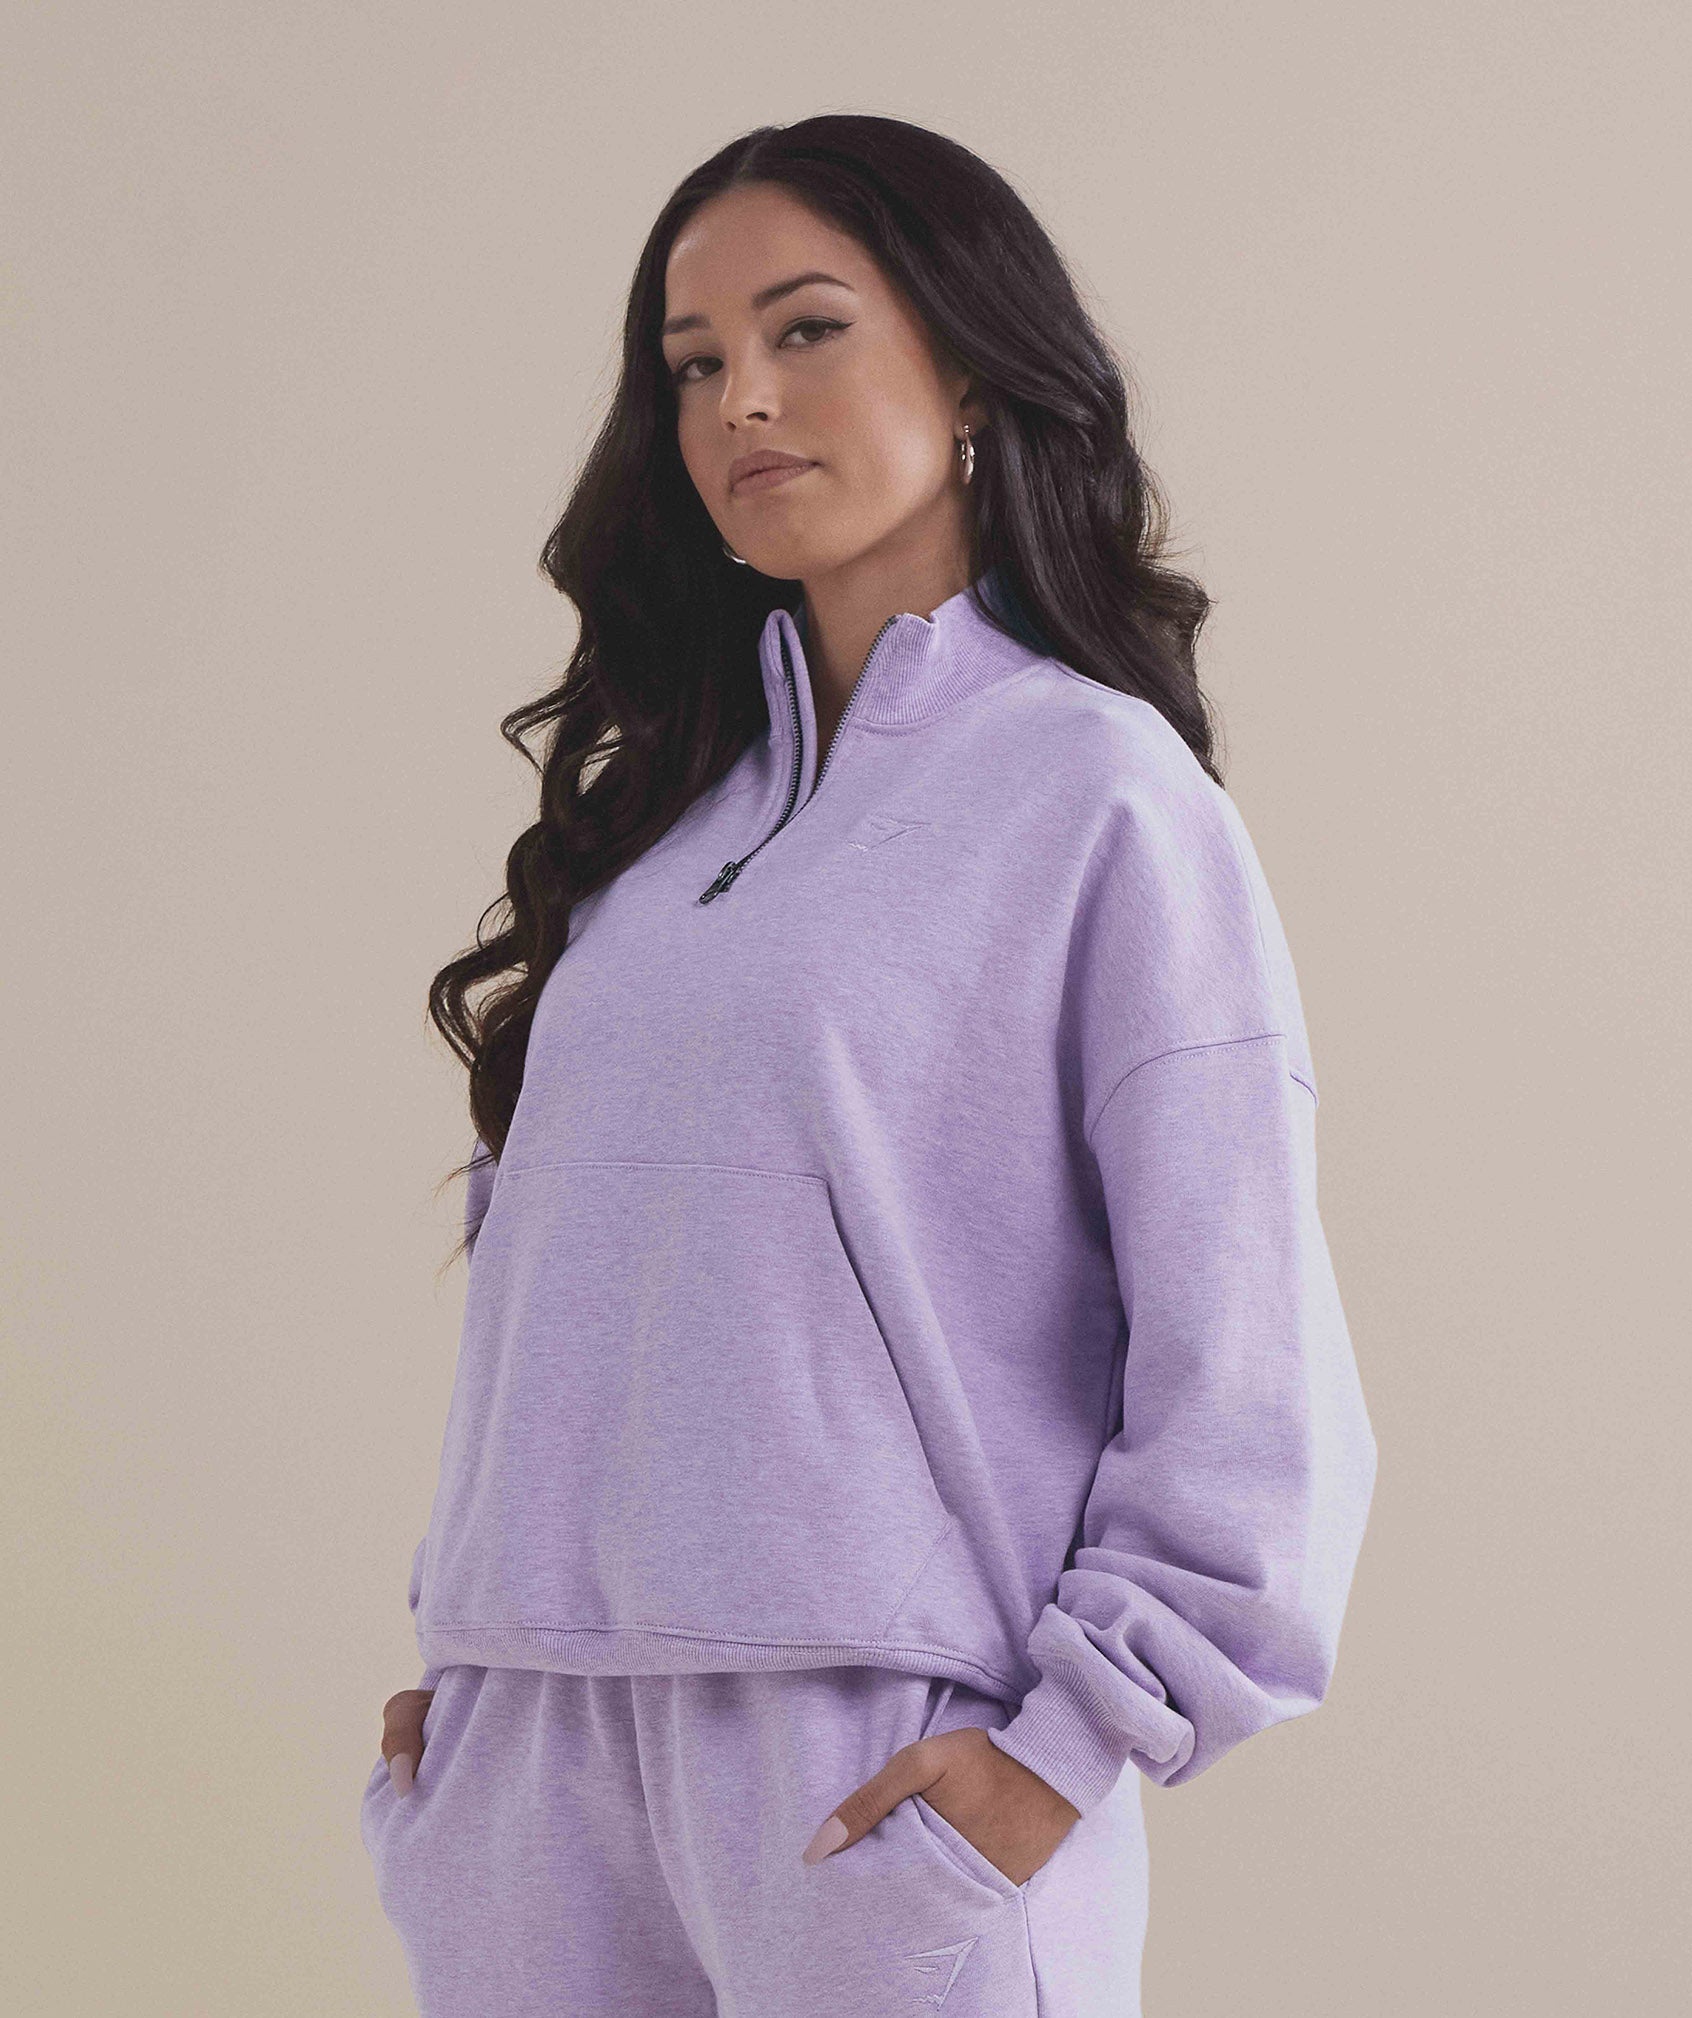 Rest Day Sweats 1/2 Zip Pullover in Aura Lilac Marl - view 1